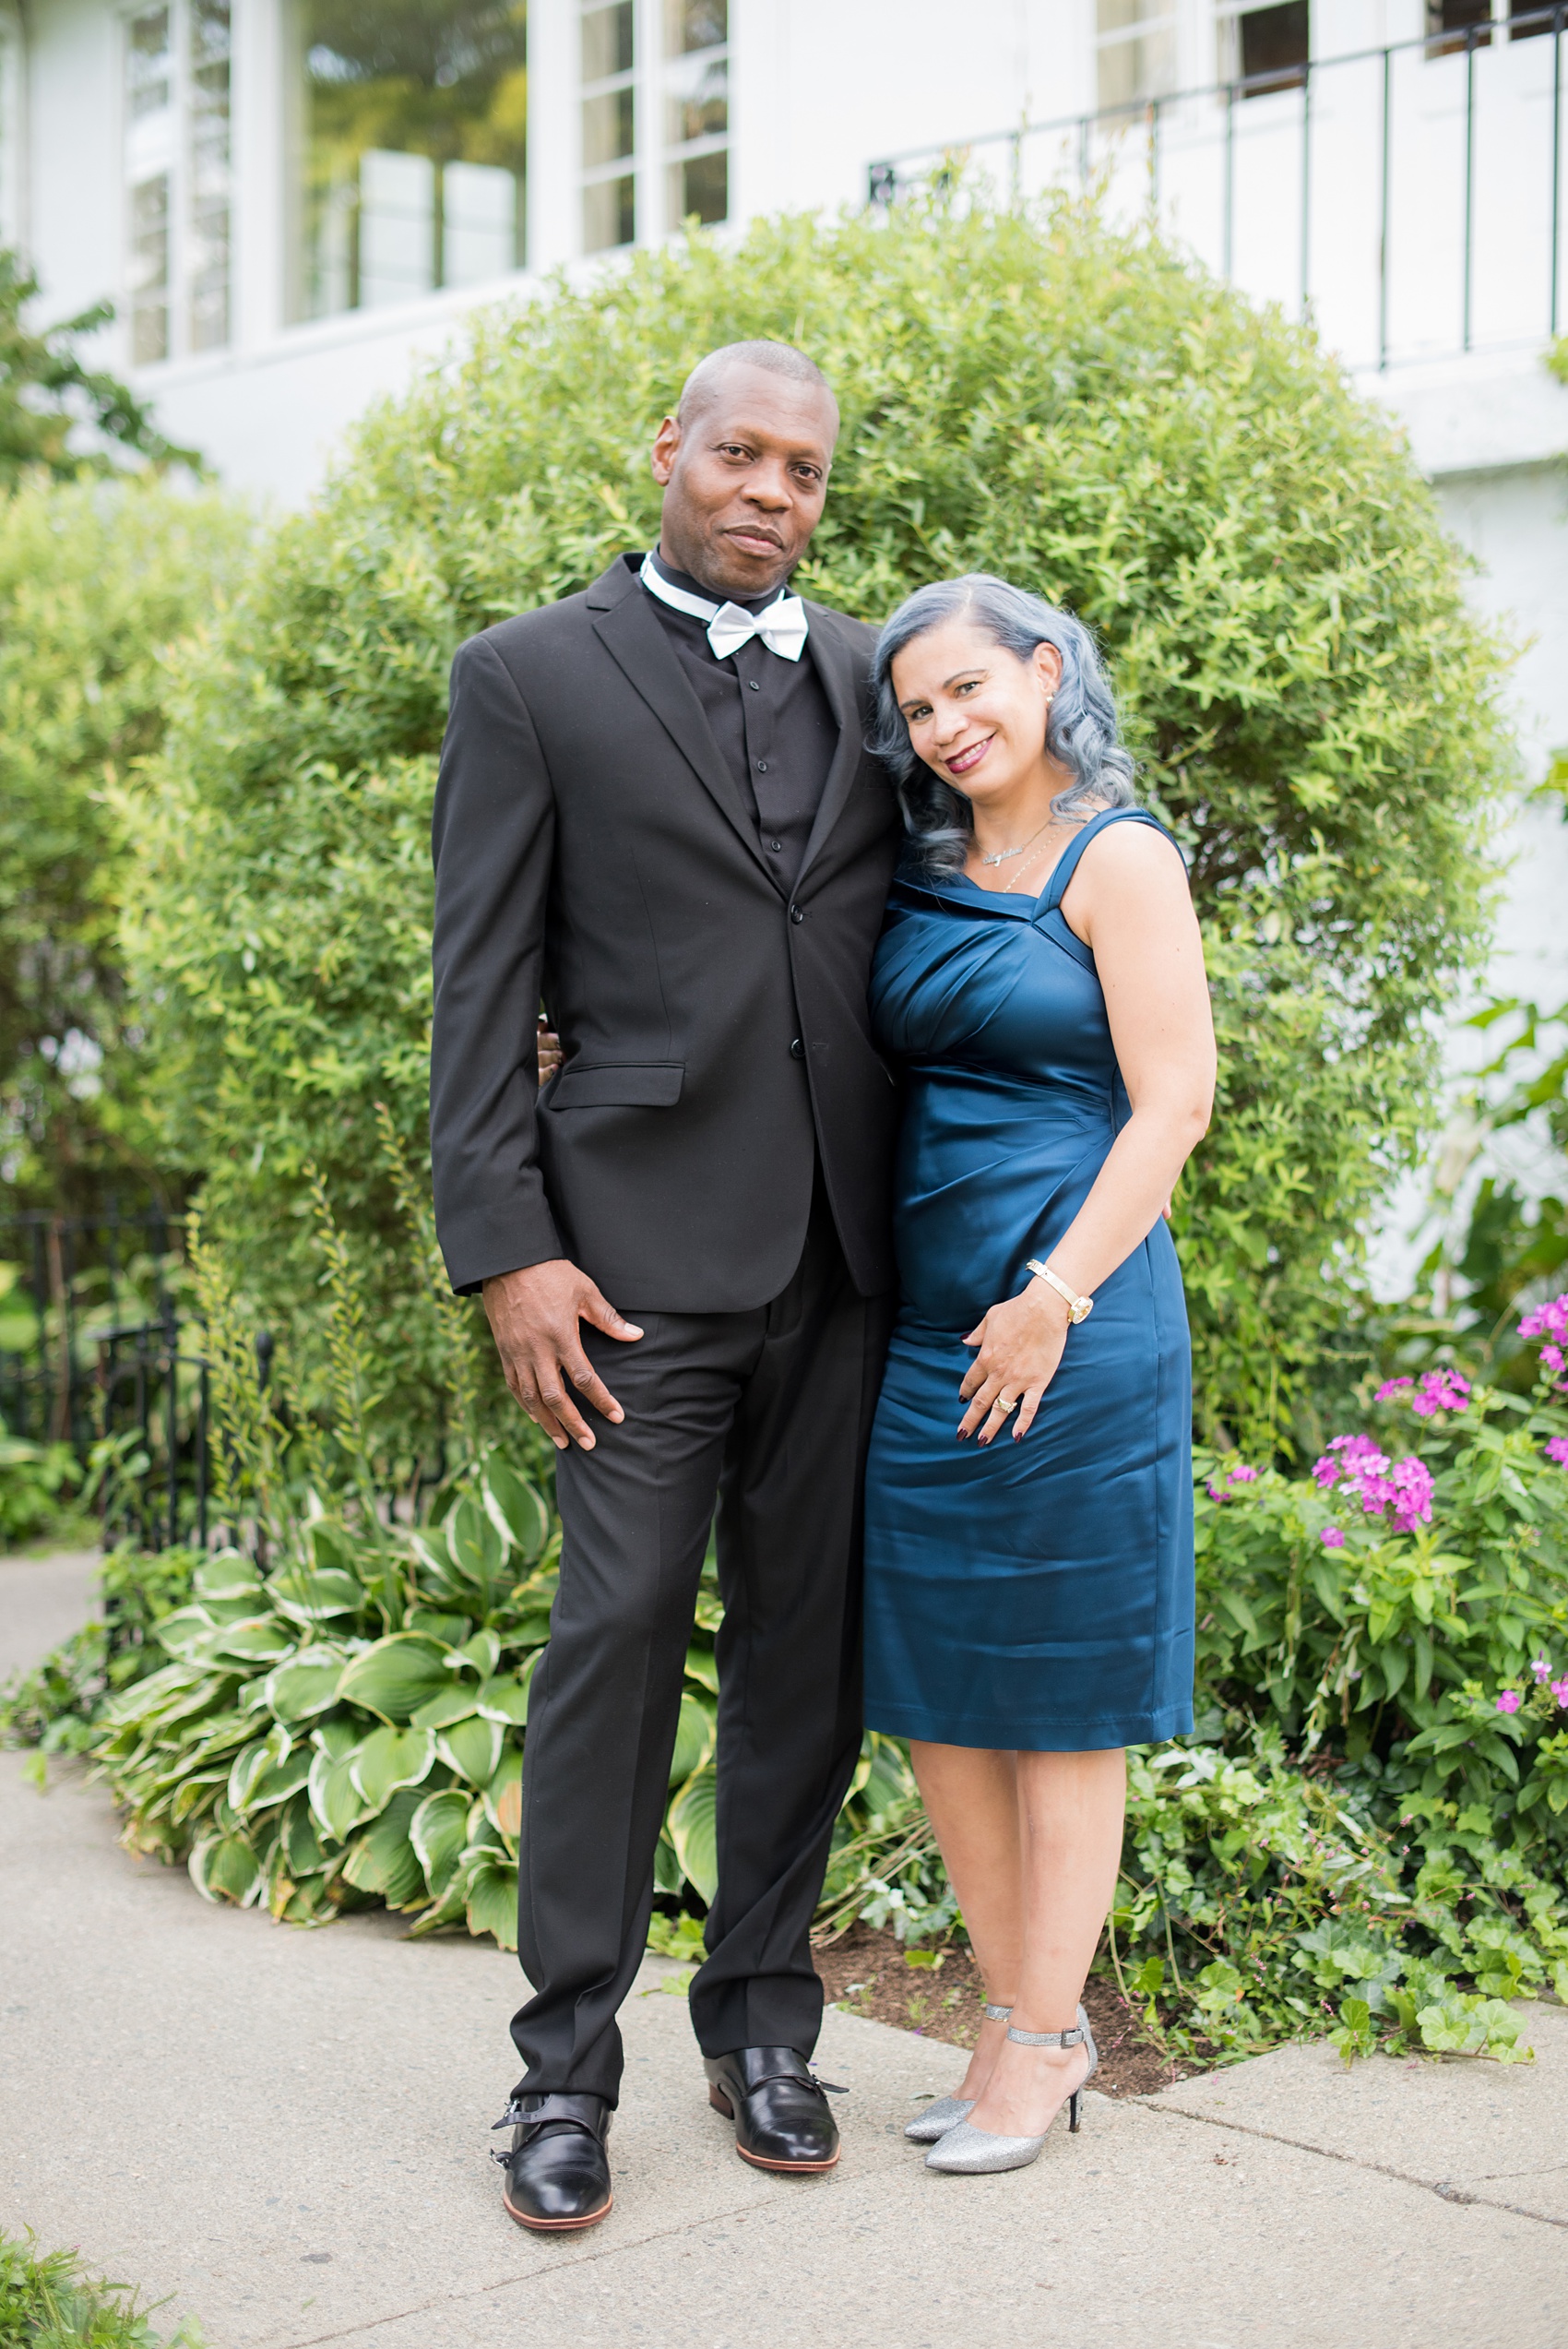 Wedding photos at Crabtree's Kittle House in Chappaqua, New York by Mikkel Paige Photography. The guests at this partially outdoor, summer wedding were dressed wonderfully in tuxedos and fun bow ties! Click through for more inspiration from this beautiful wedding day! #mikkelpaige #CrabtreesKittleHouse #WestchesterWeddingVenues #WestchesterWedding #summerwedding #weddingguests #welldressedguests 